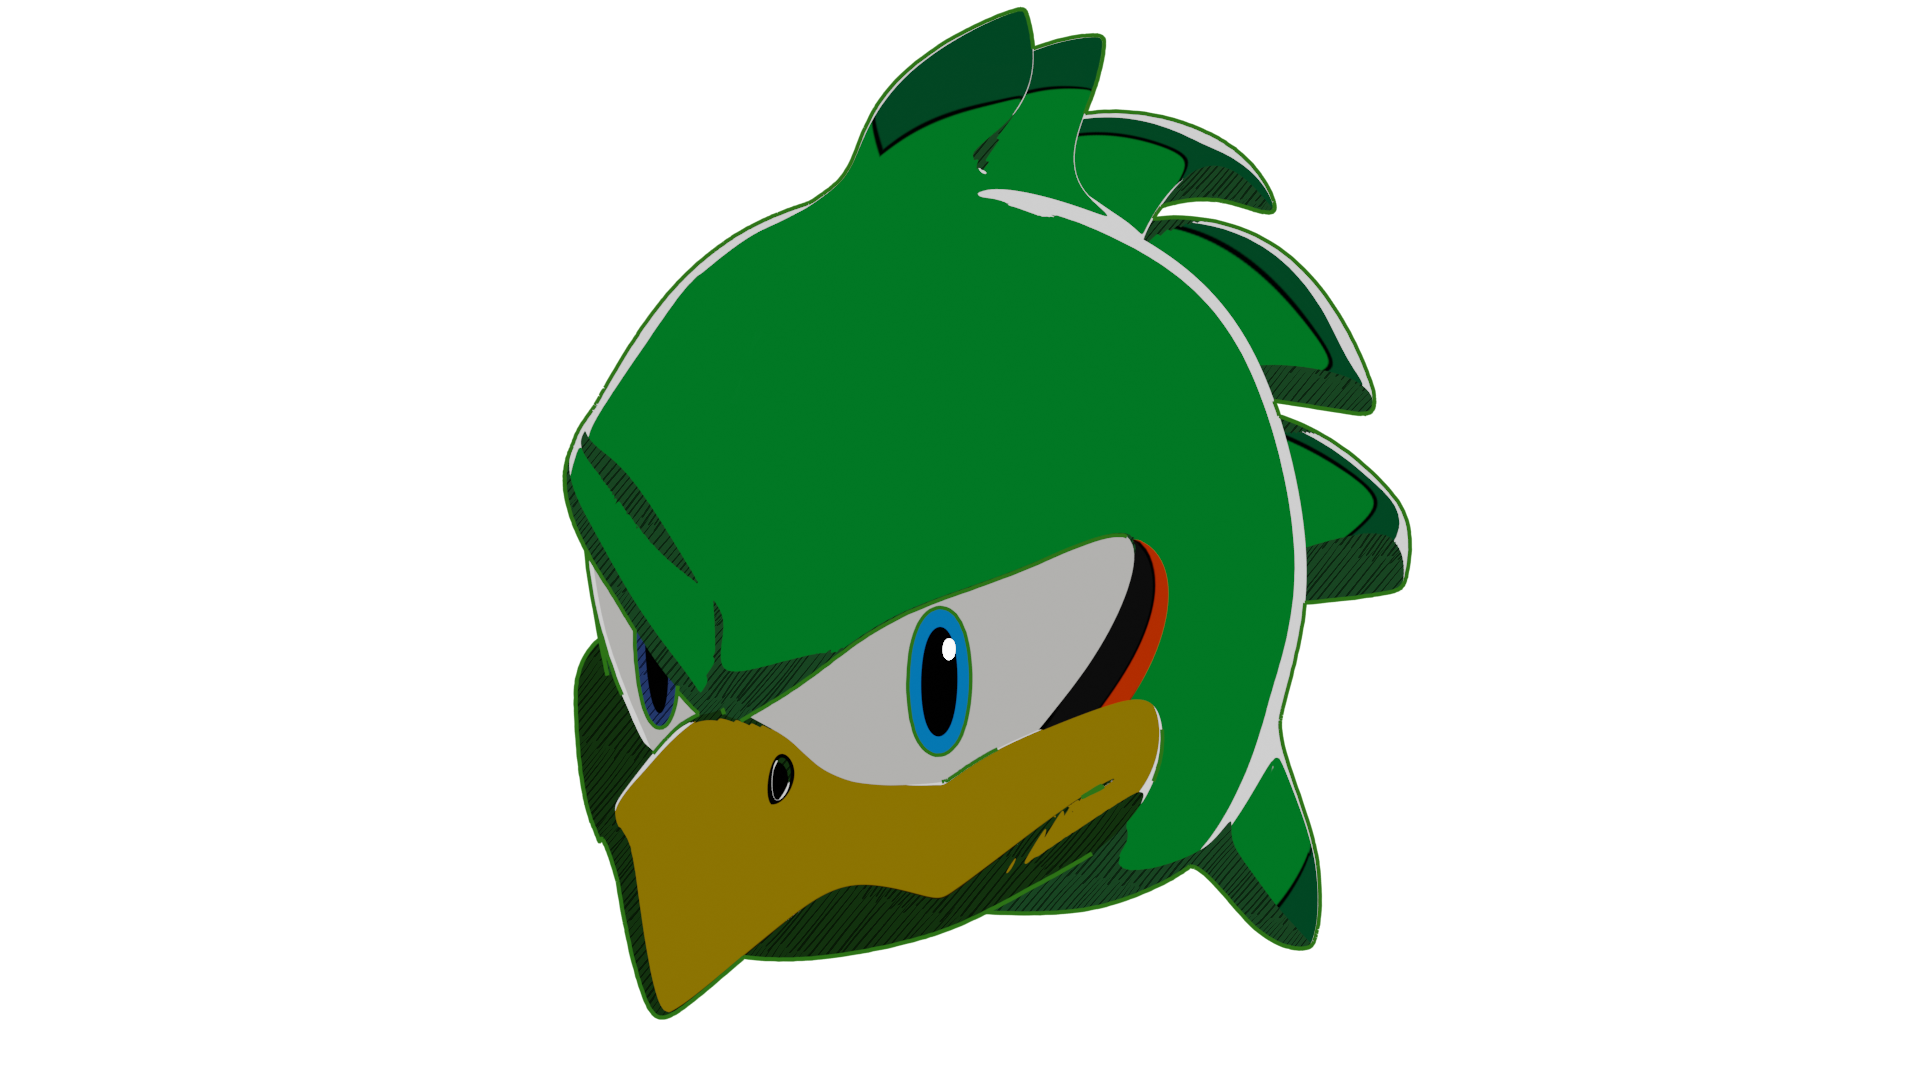 work in progress 3D model of Jet the Hawk! using a sonic riders shader a friend made for this render to give him a bit of flair to his look.: SonicTheHedgehog